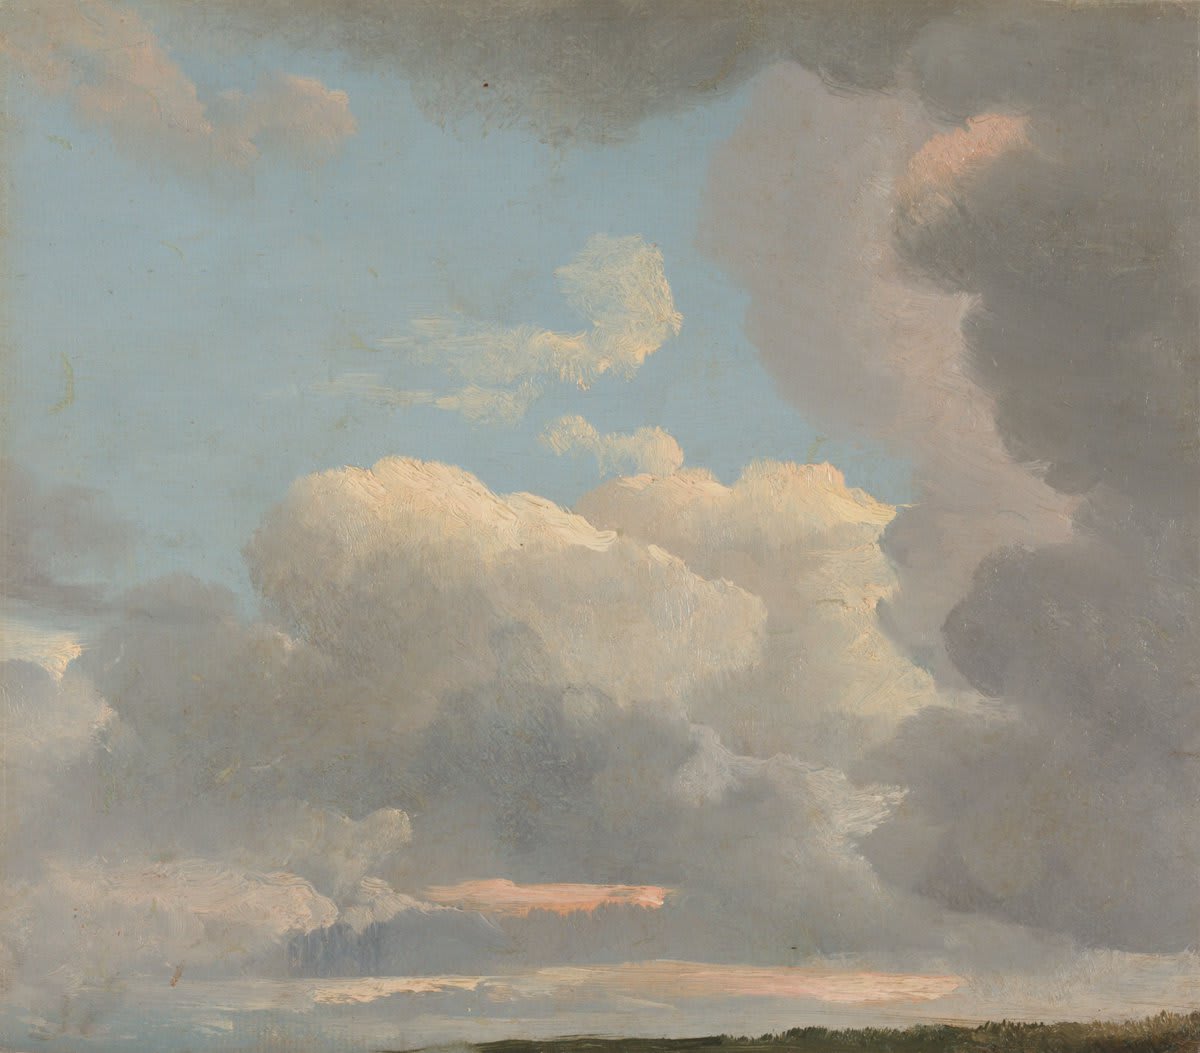 Pause and enjoy this lovely patch of early evening sky by Simon Denis. 😌 Painted with oil paints on paper, Denis's quickly rendered scene is a reminder of the popularity of plein-air painting among artists working in Italy around 1800. Learn more: